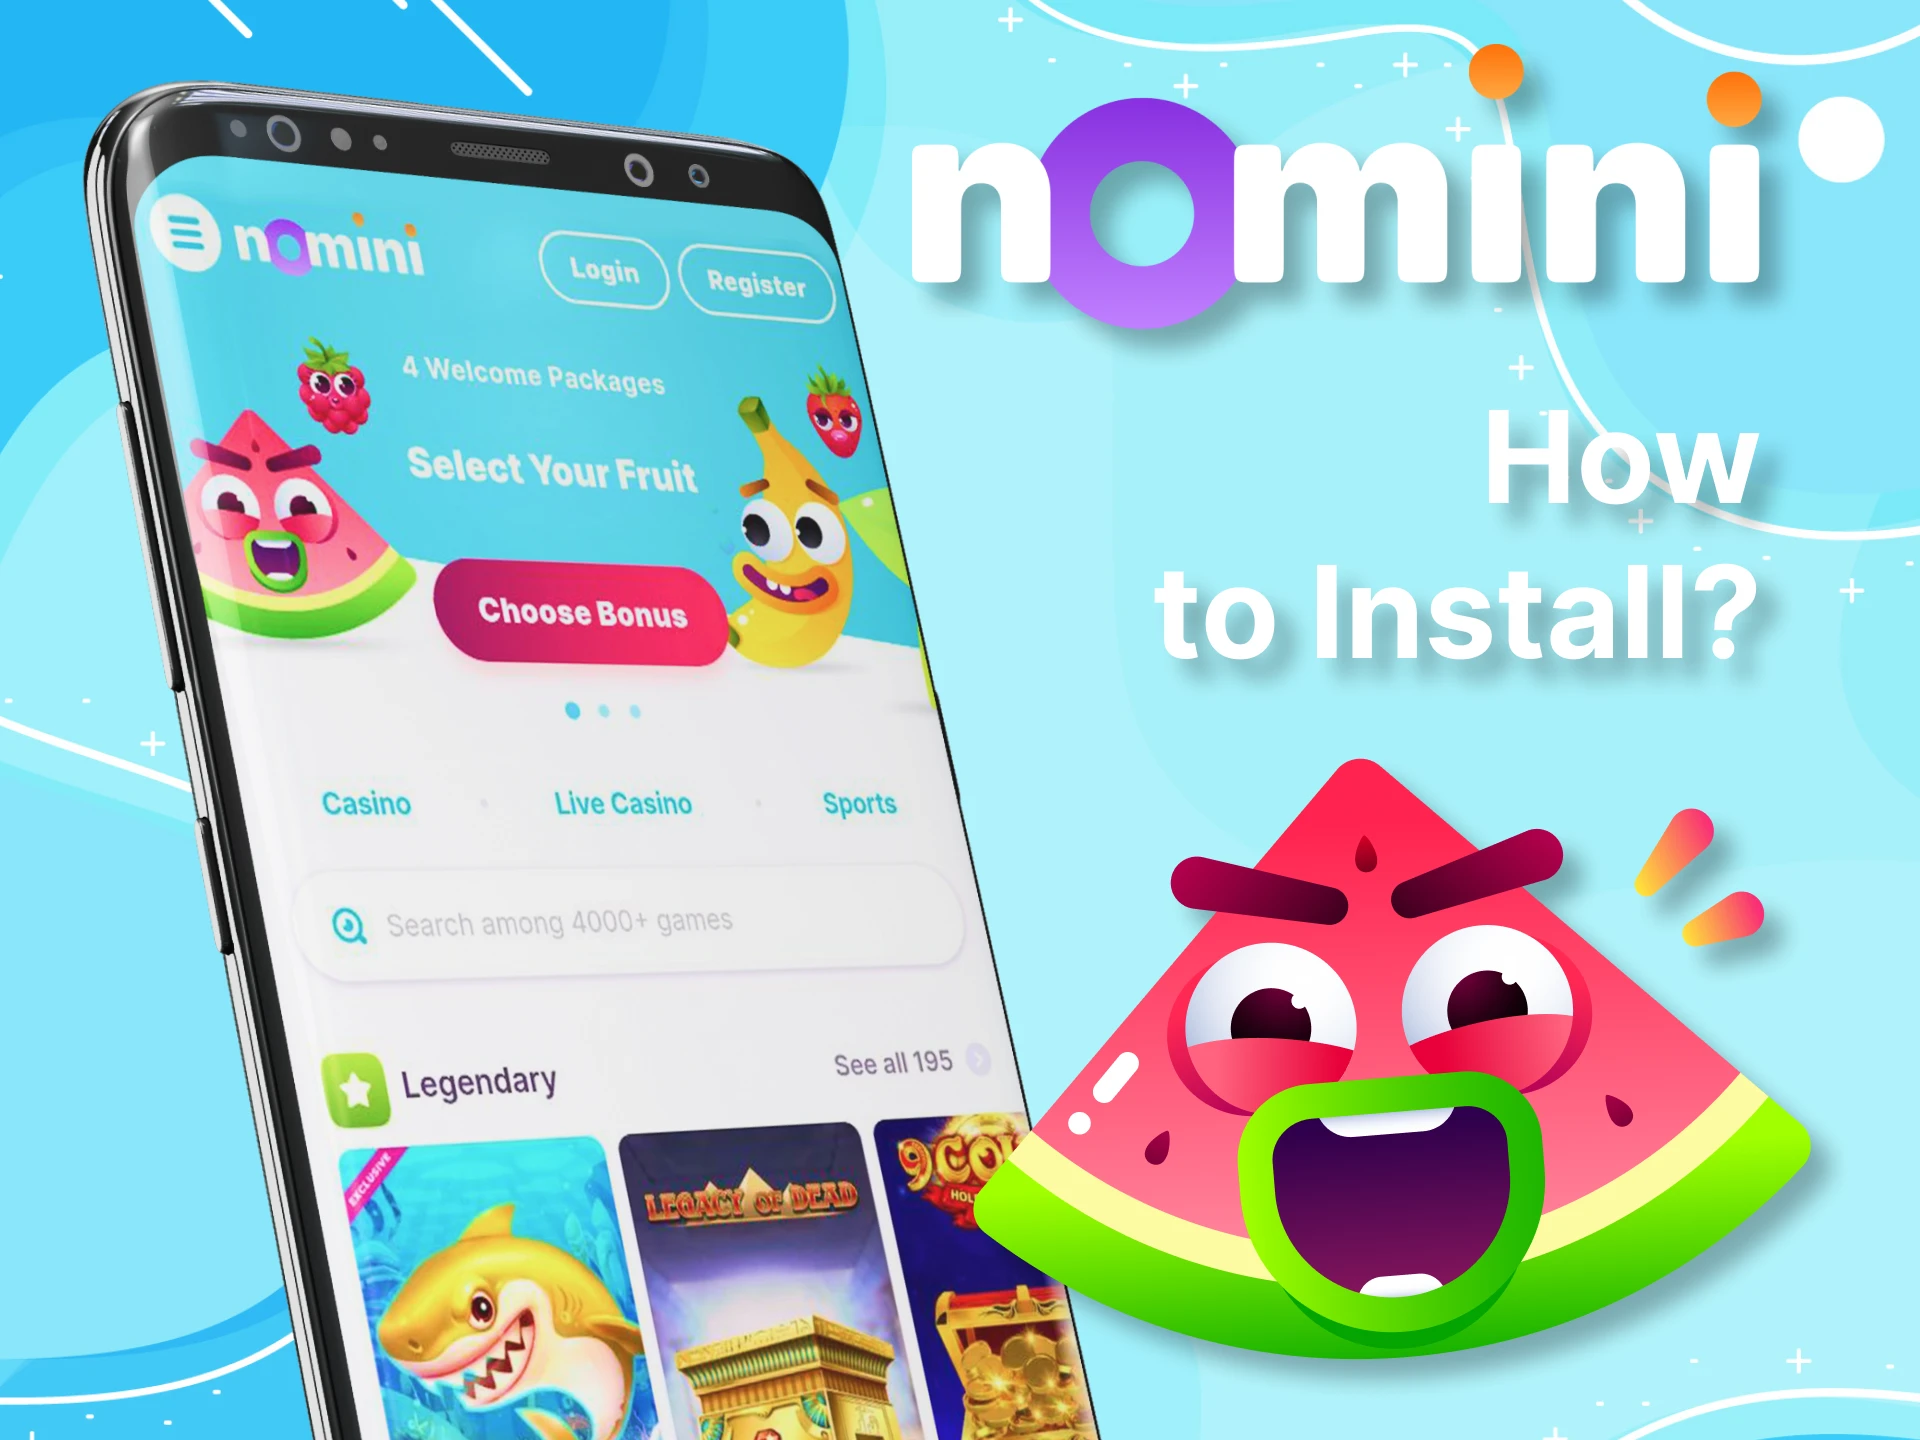 With these instructions you can easily install the Nomini app on your phone.